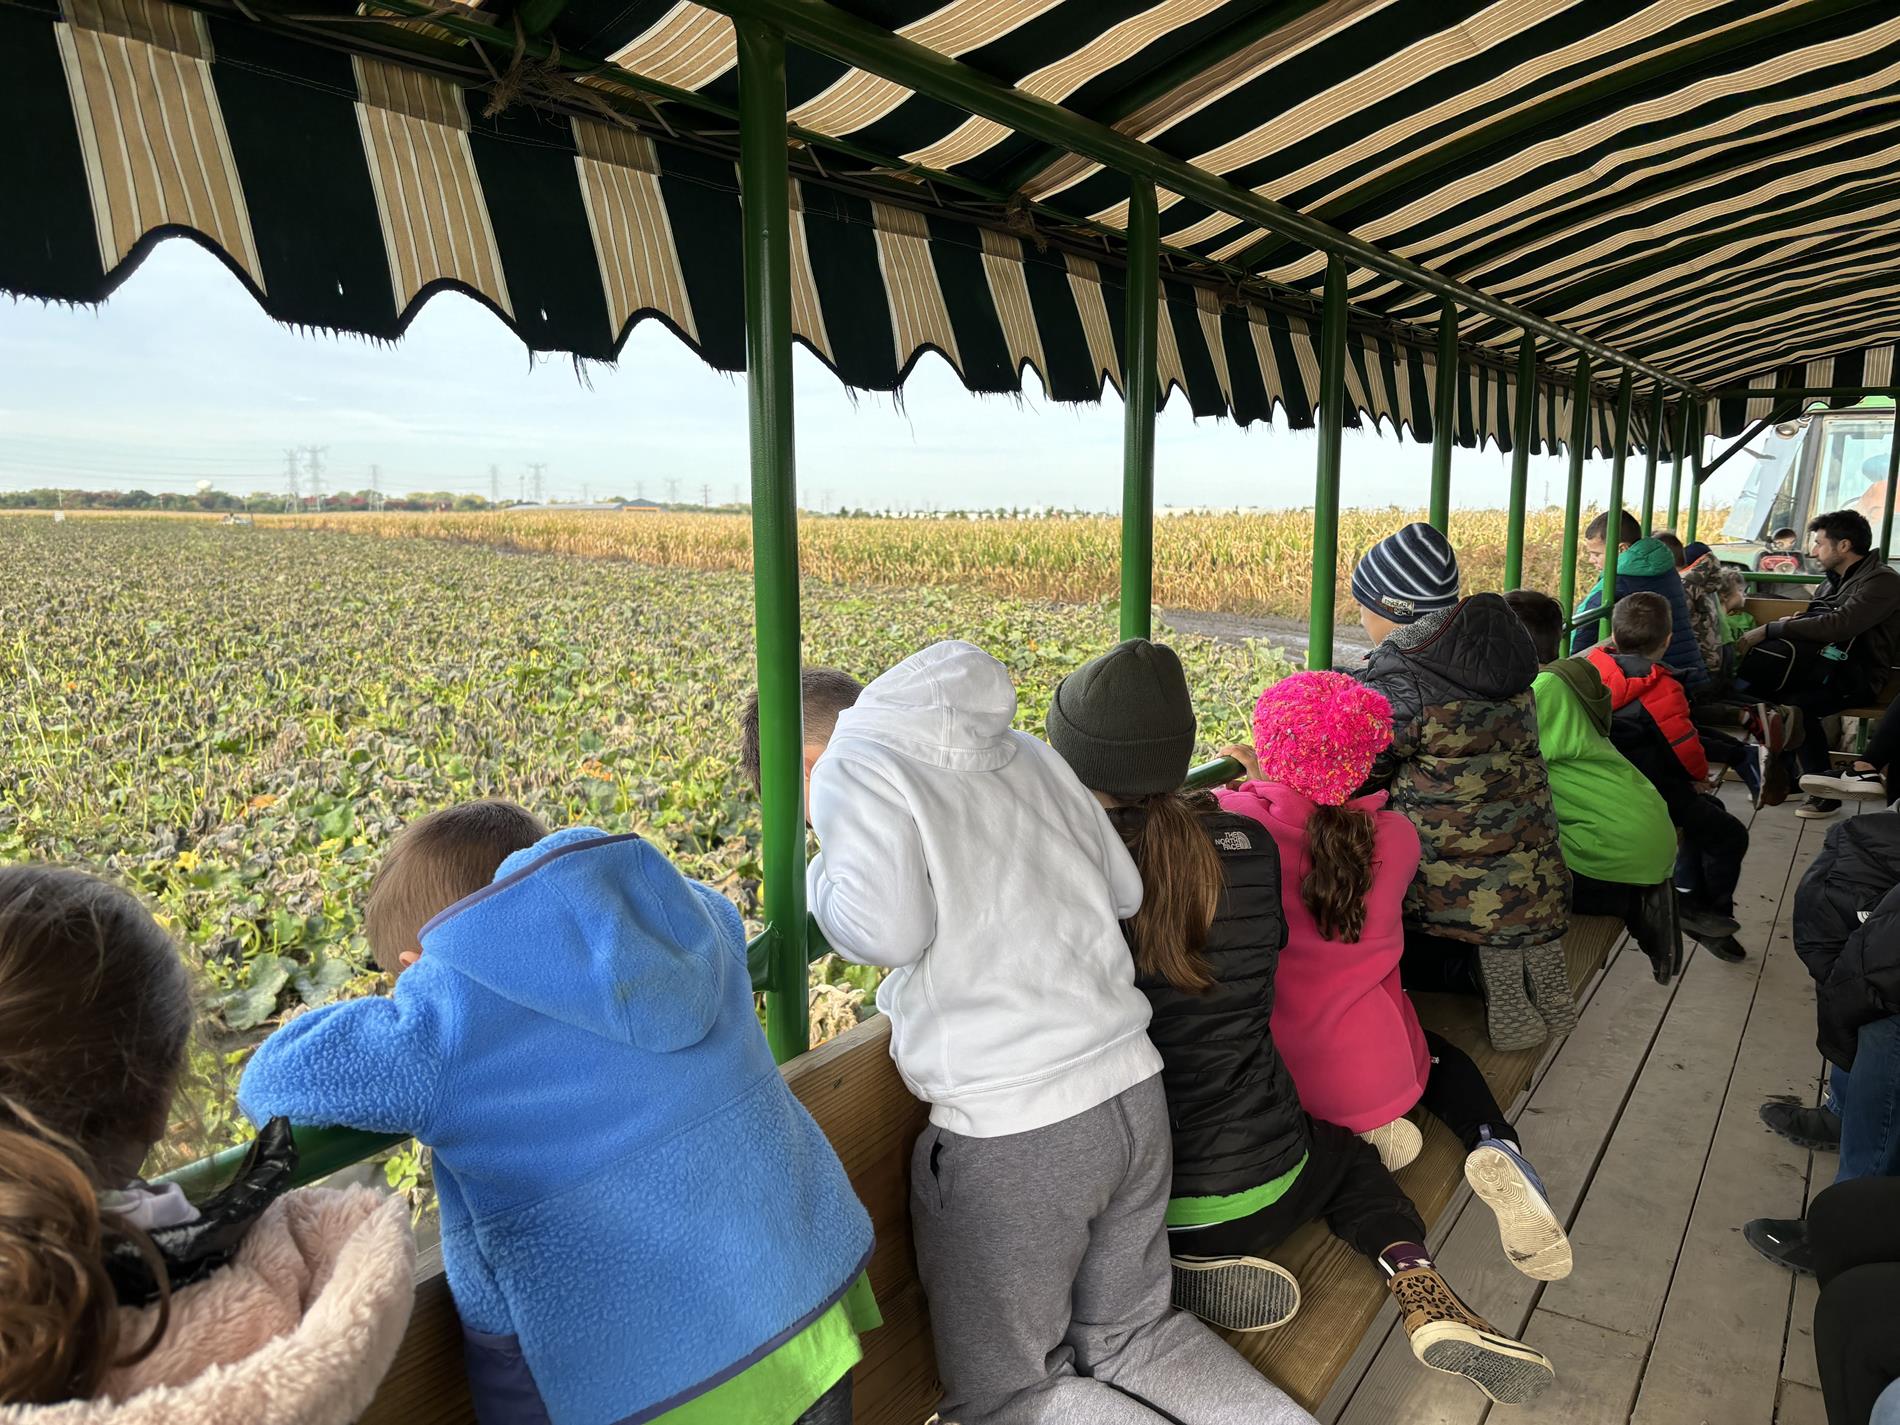 Pictures from our Field Trip on 10/17 to the pumpkin farm!